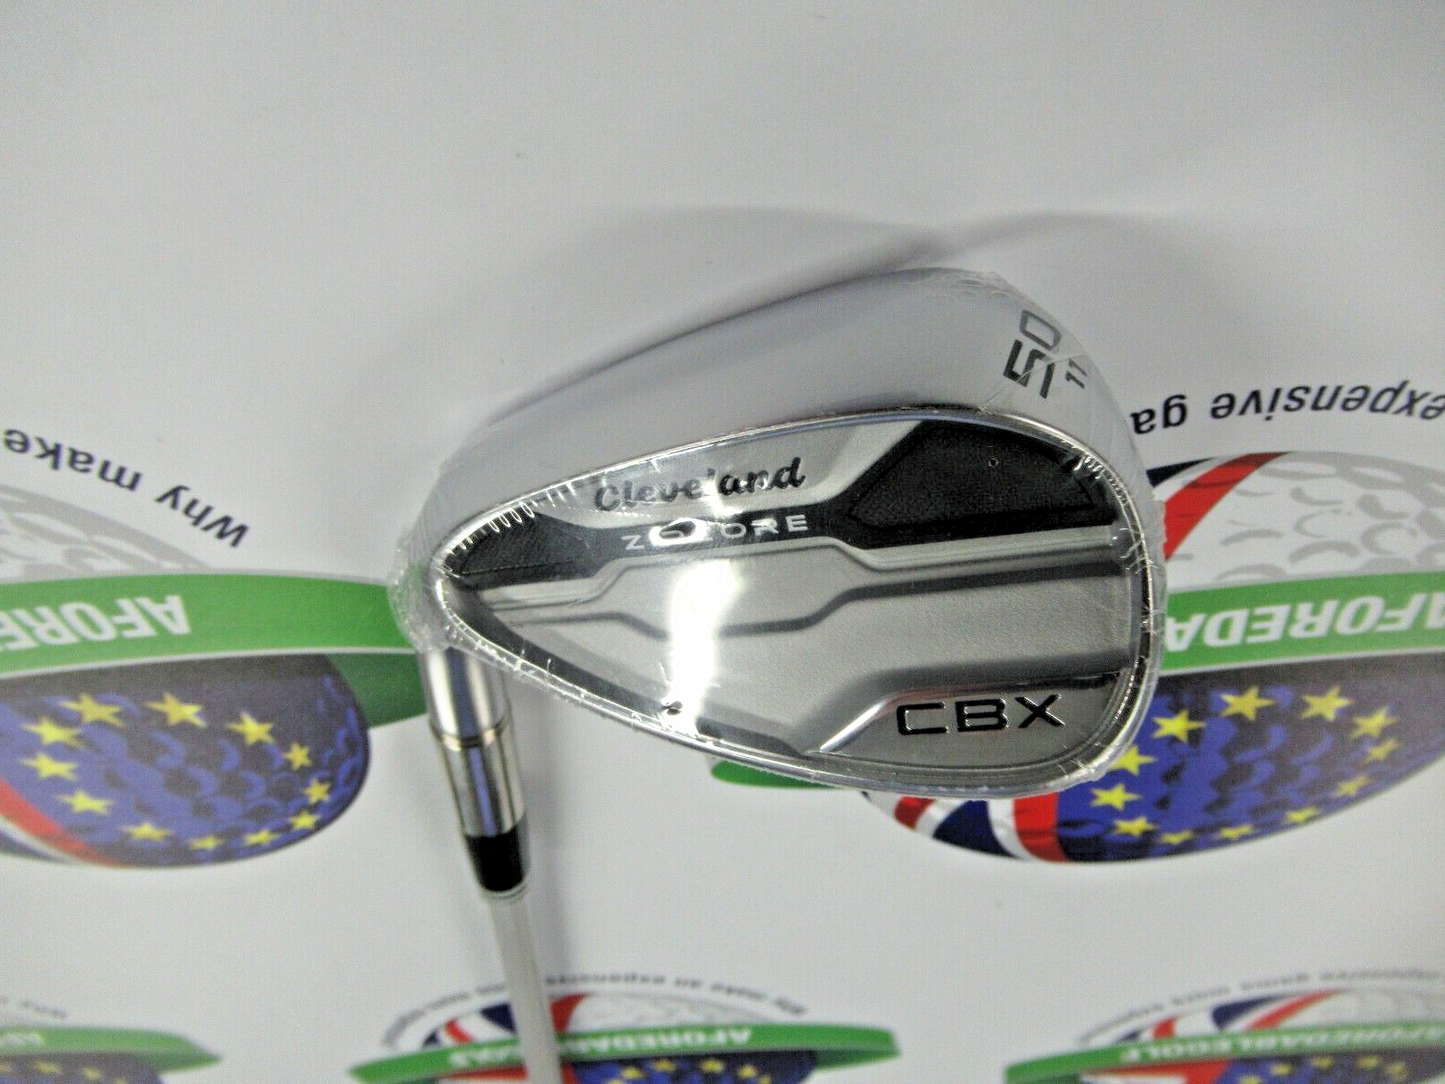 cleveland left hand cbx zipcore 50 mid 11 demo wedge action ultralite 50g womens